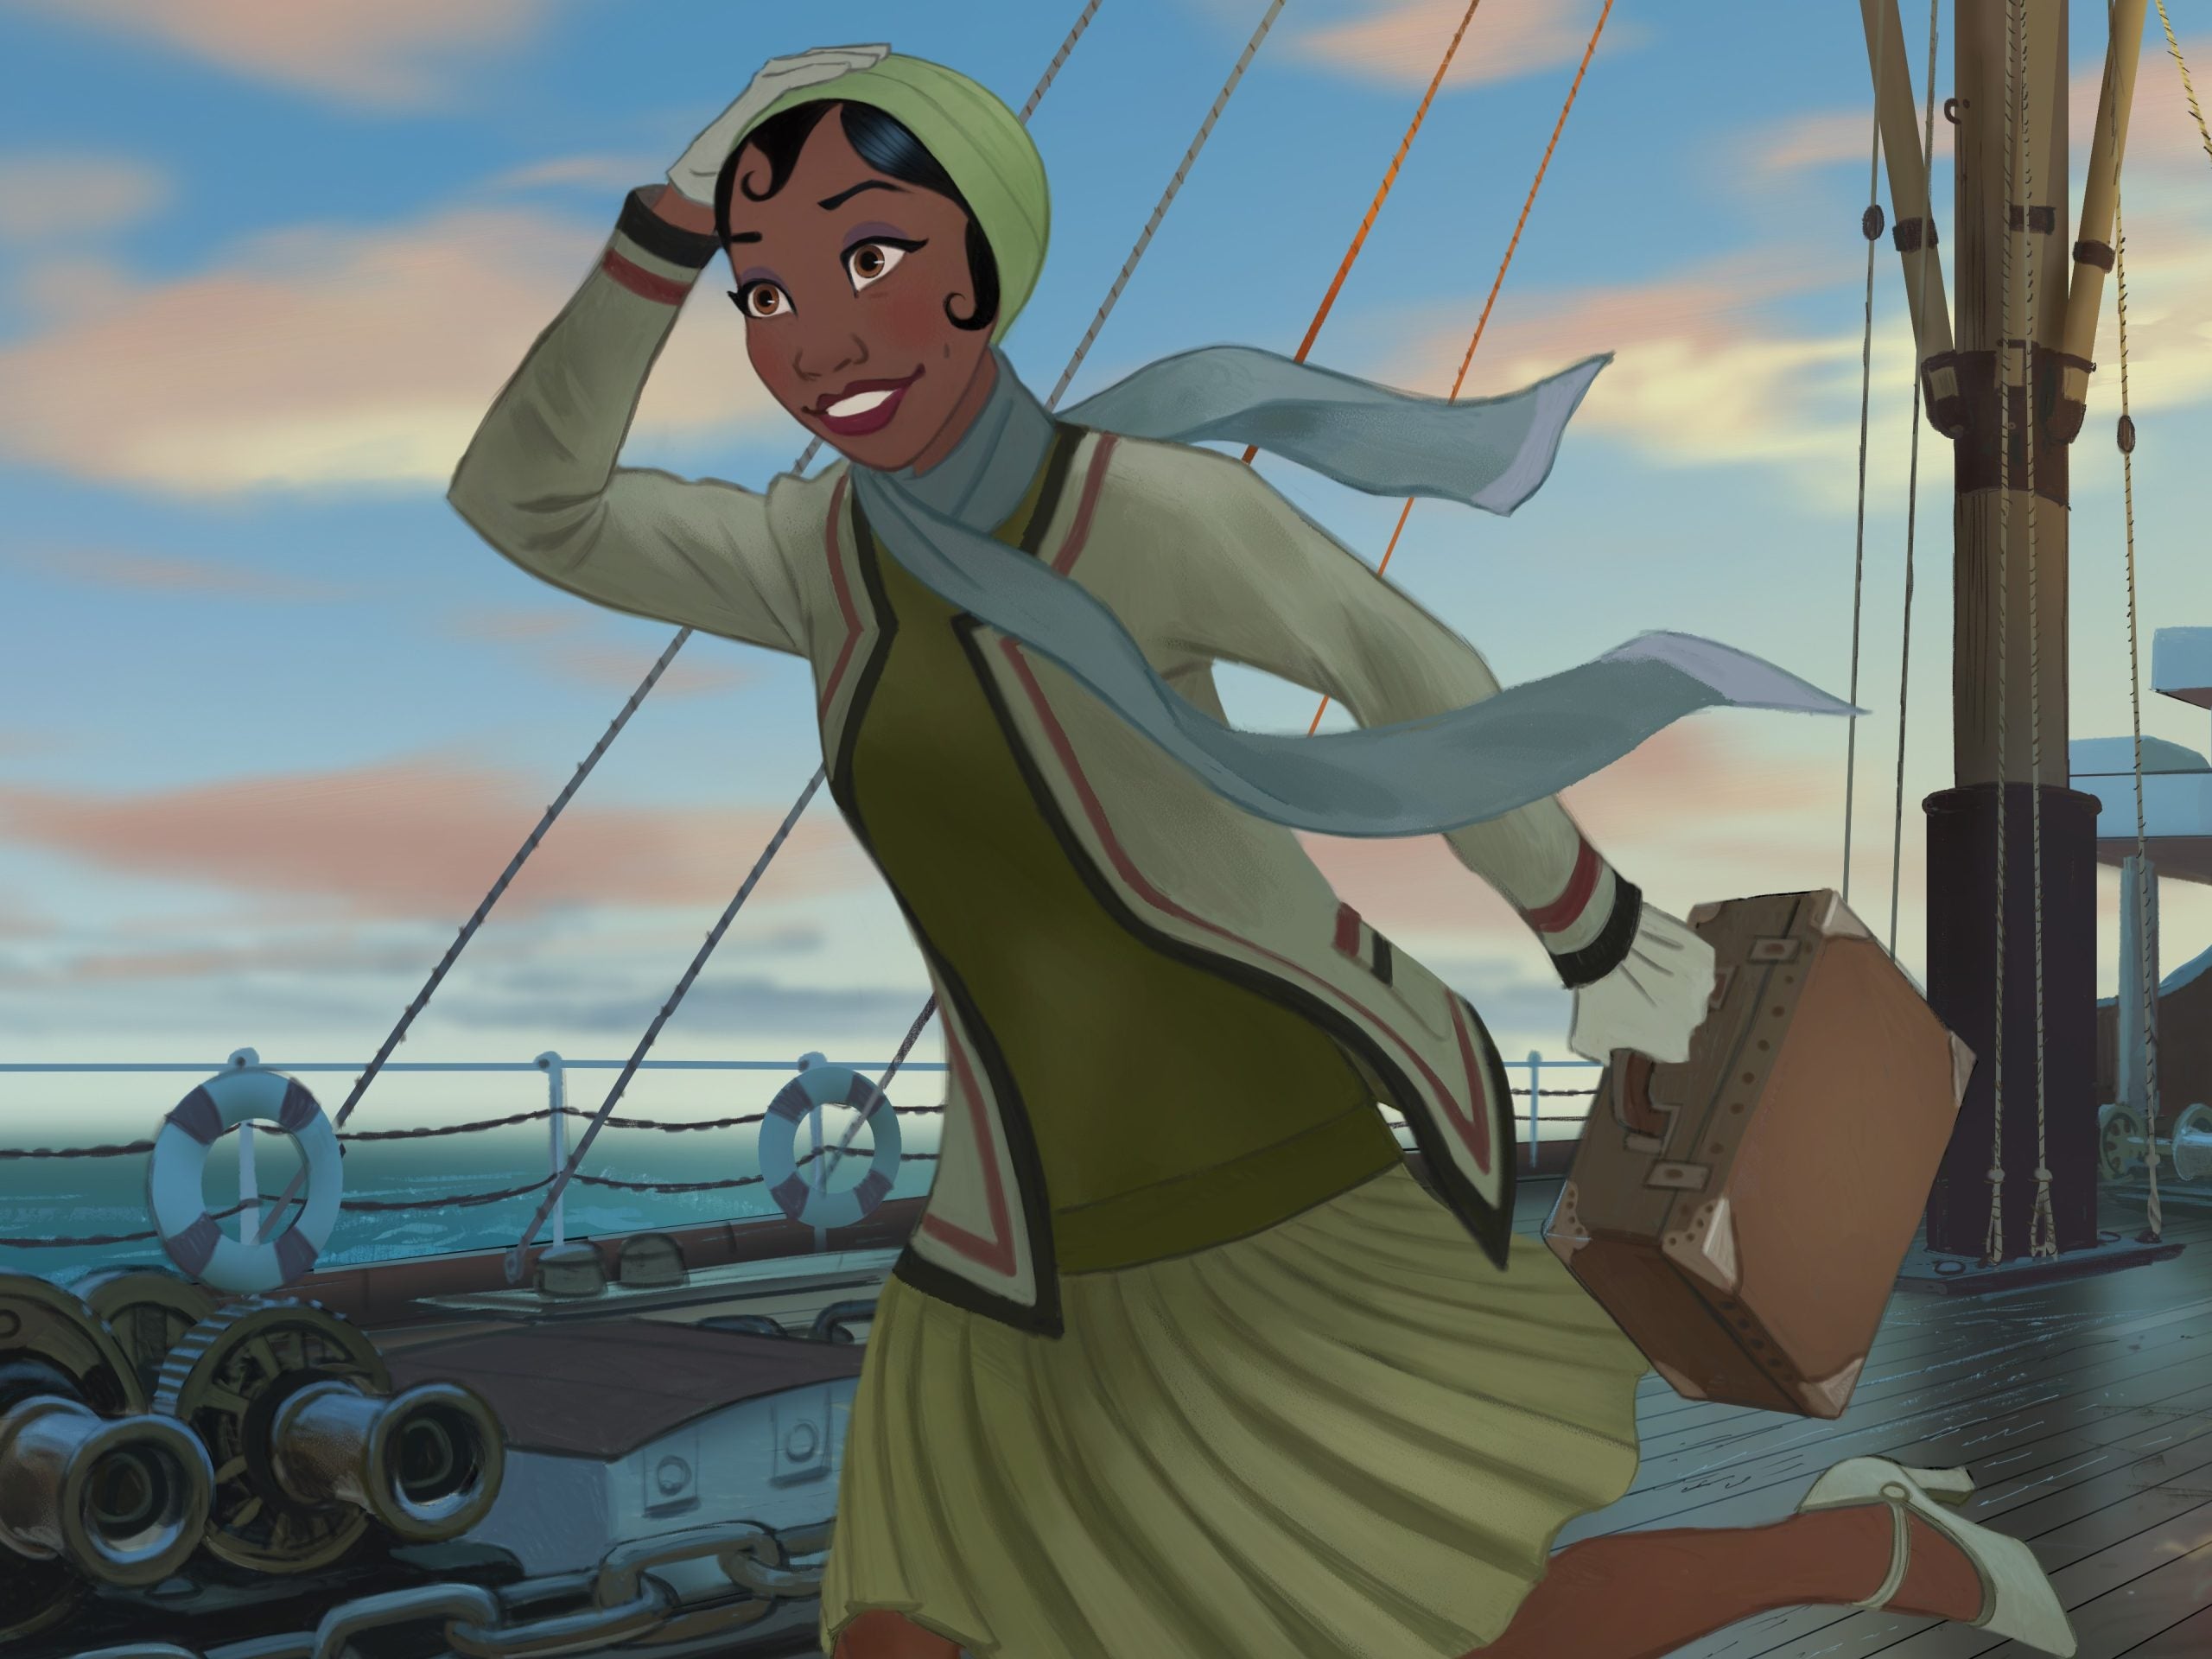 Disney Taps Stella Meghie To Write And Direct New Animated Series 'Tiana'